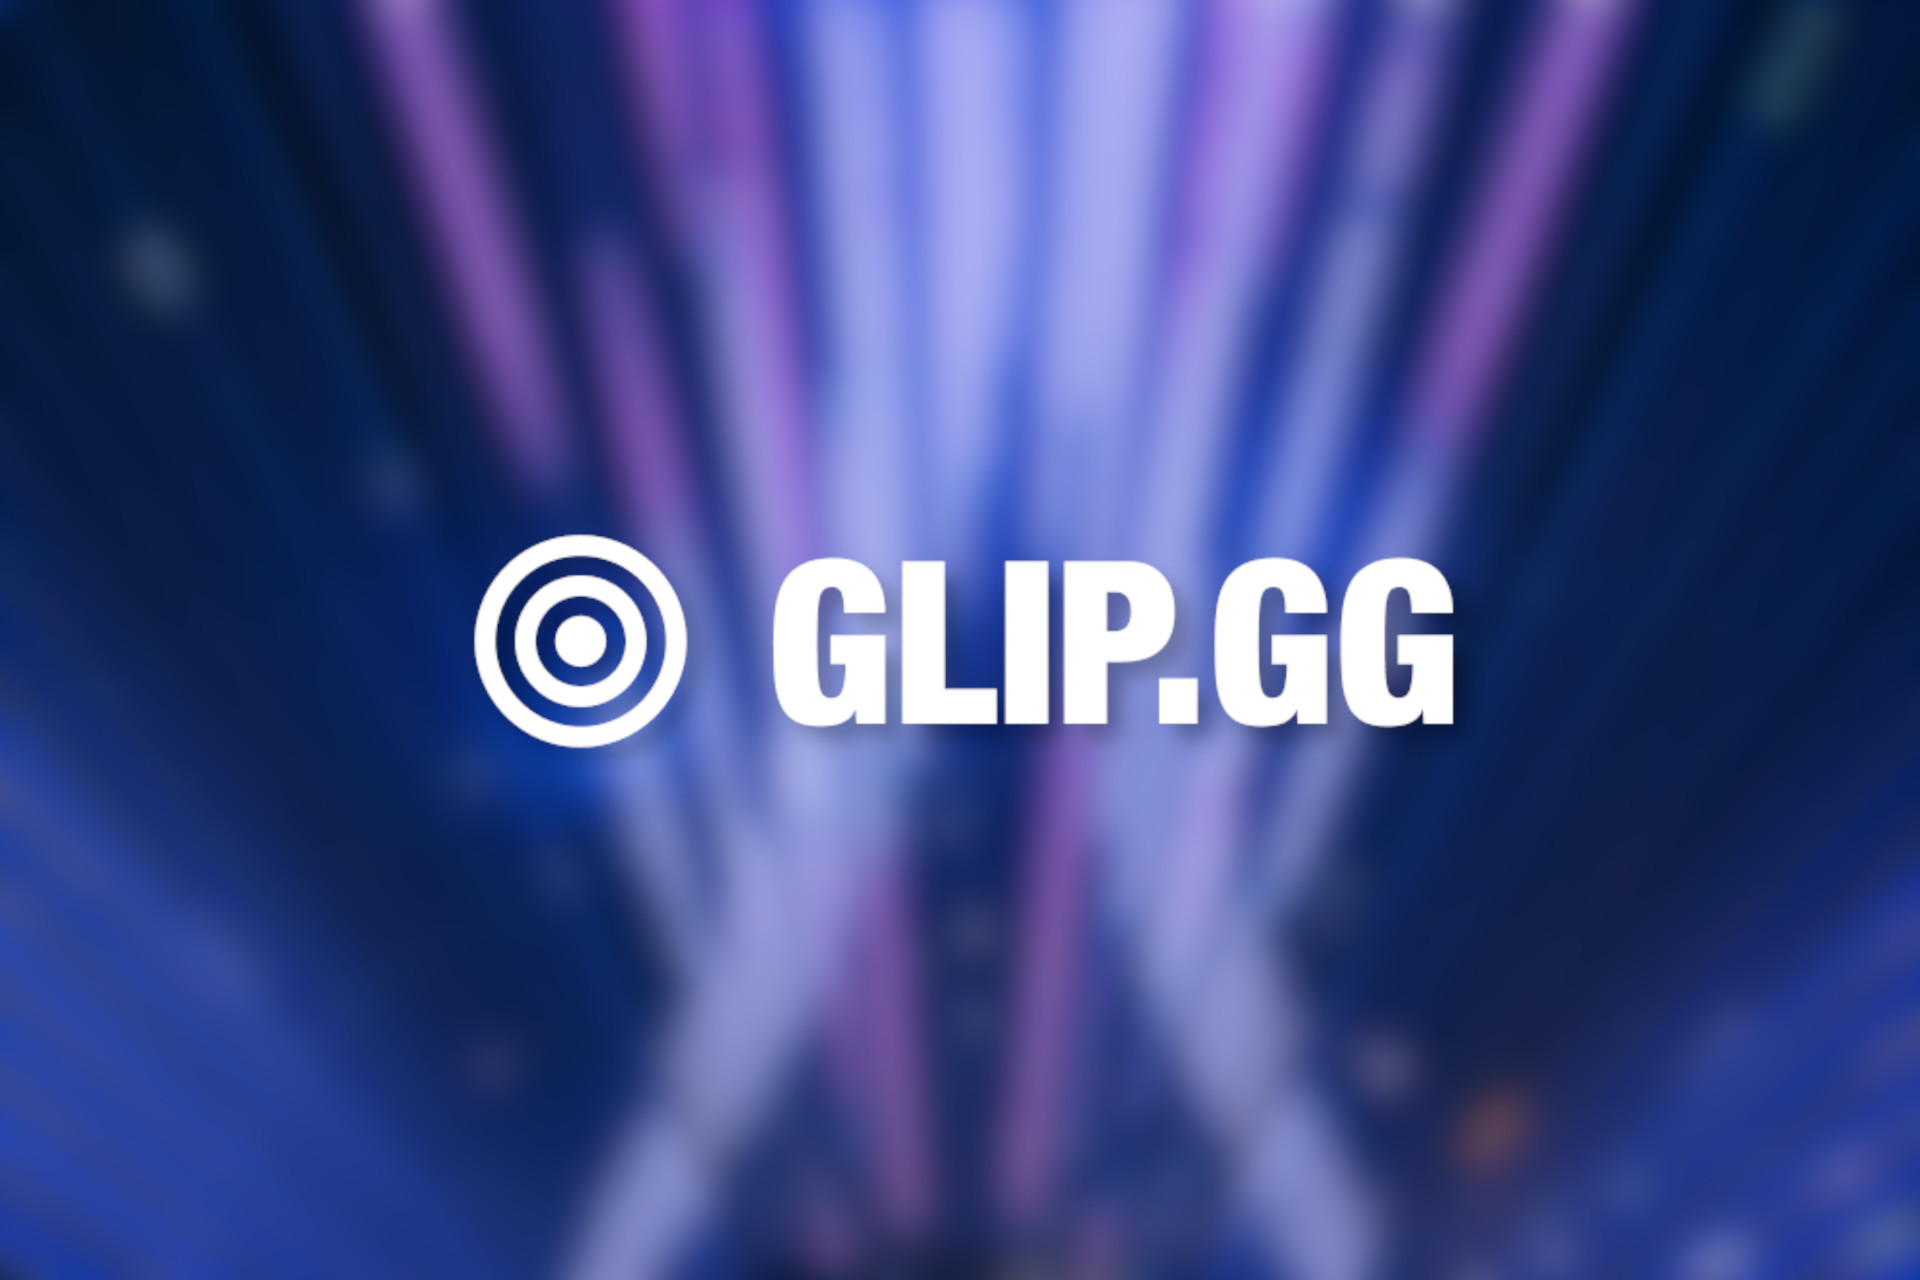 Fast-growing Web3 game discovery & wallet platform Glip has disclosed strings of strategic partnerships with leading web3 games including Axie Infinity, Netmarble, PlayDapp, Kakao Games, Neowiz, and others.